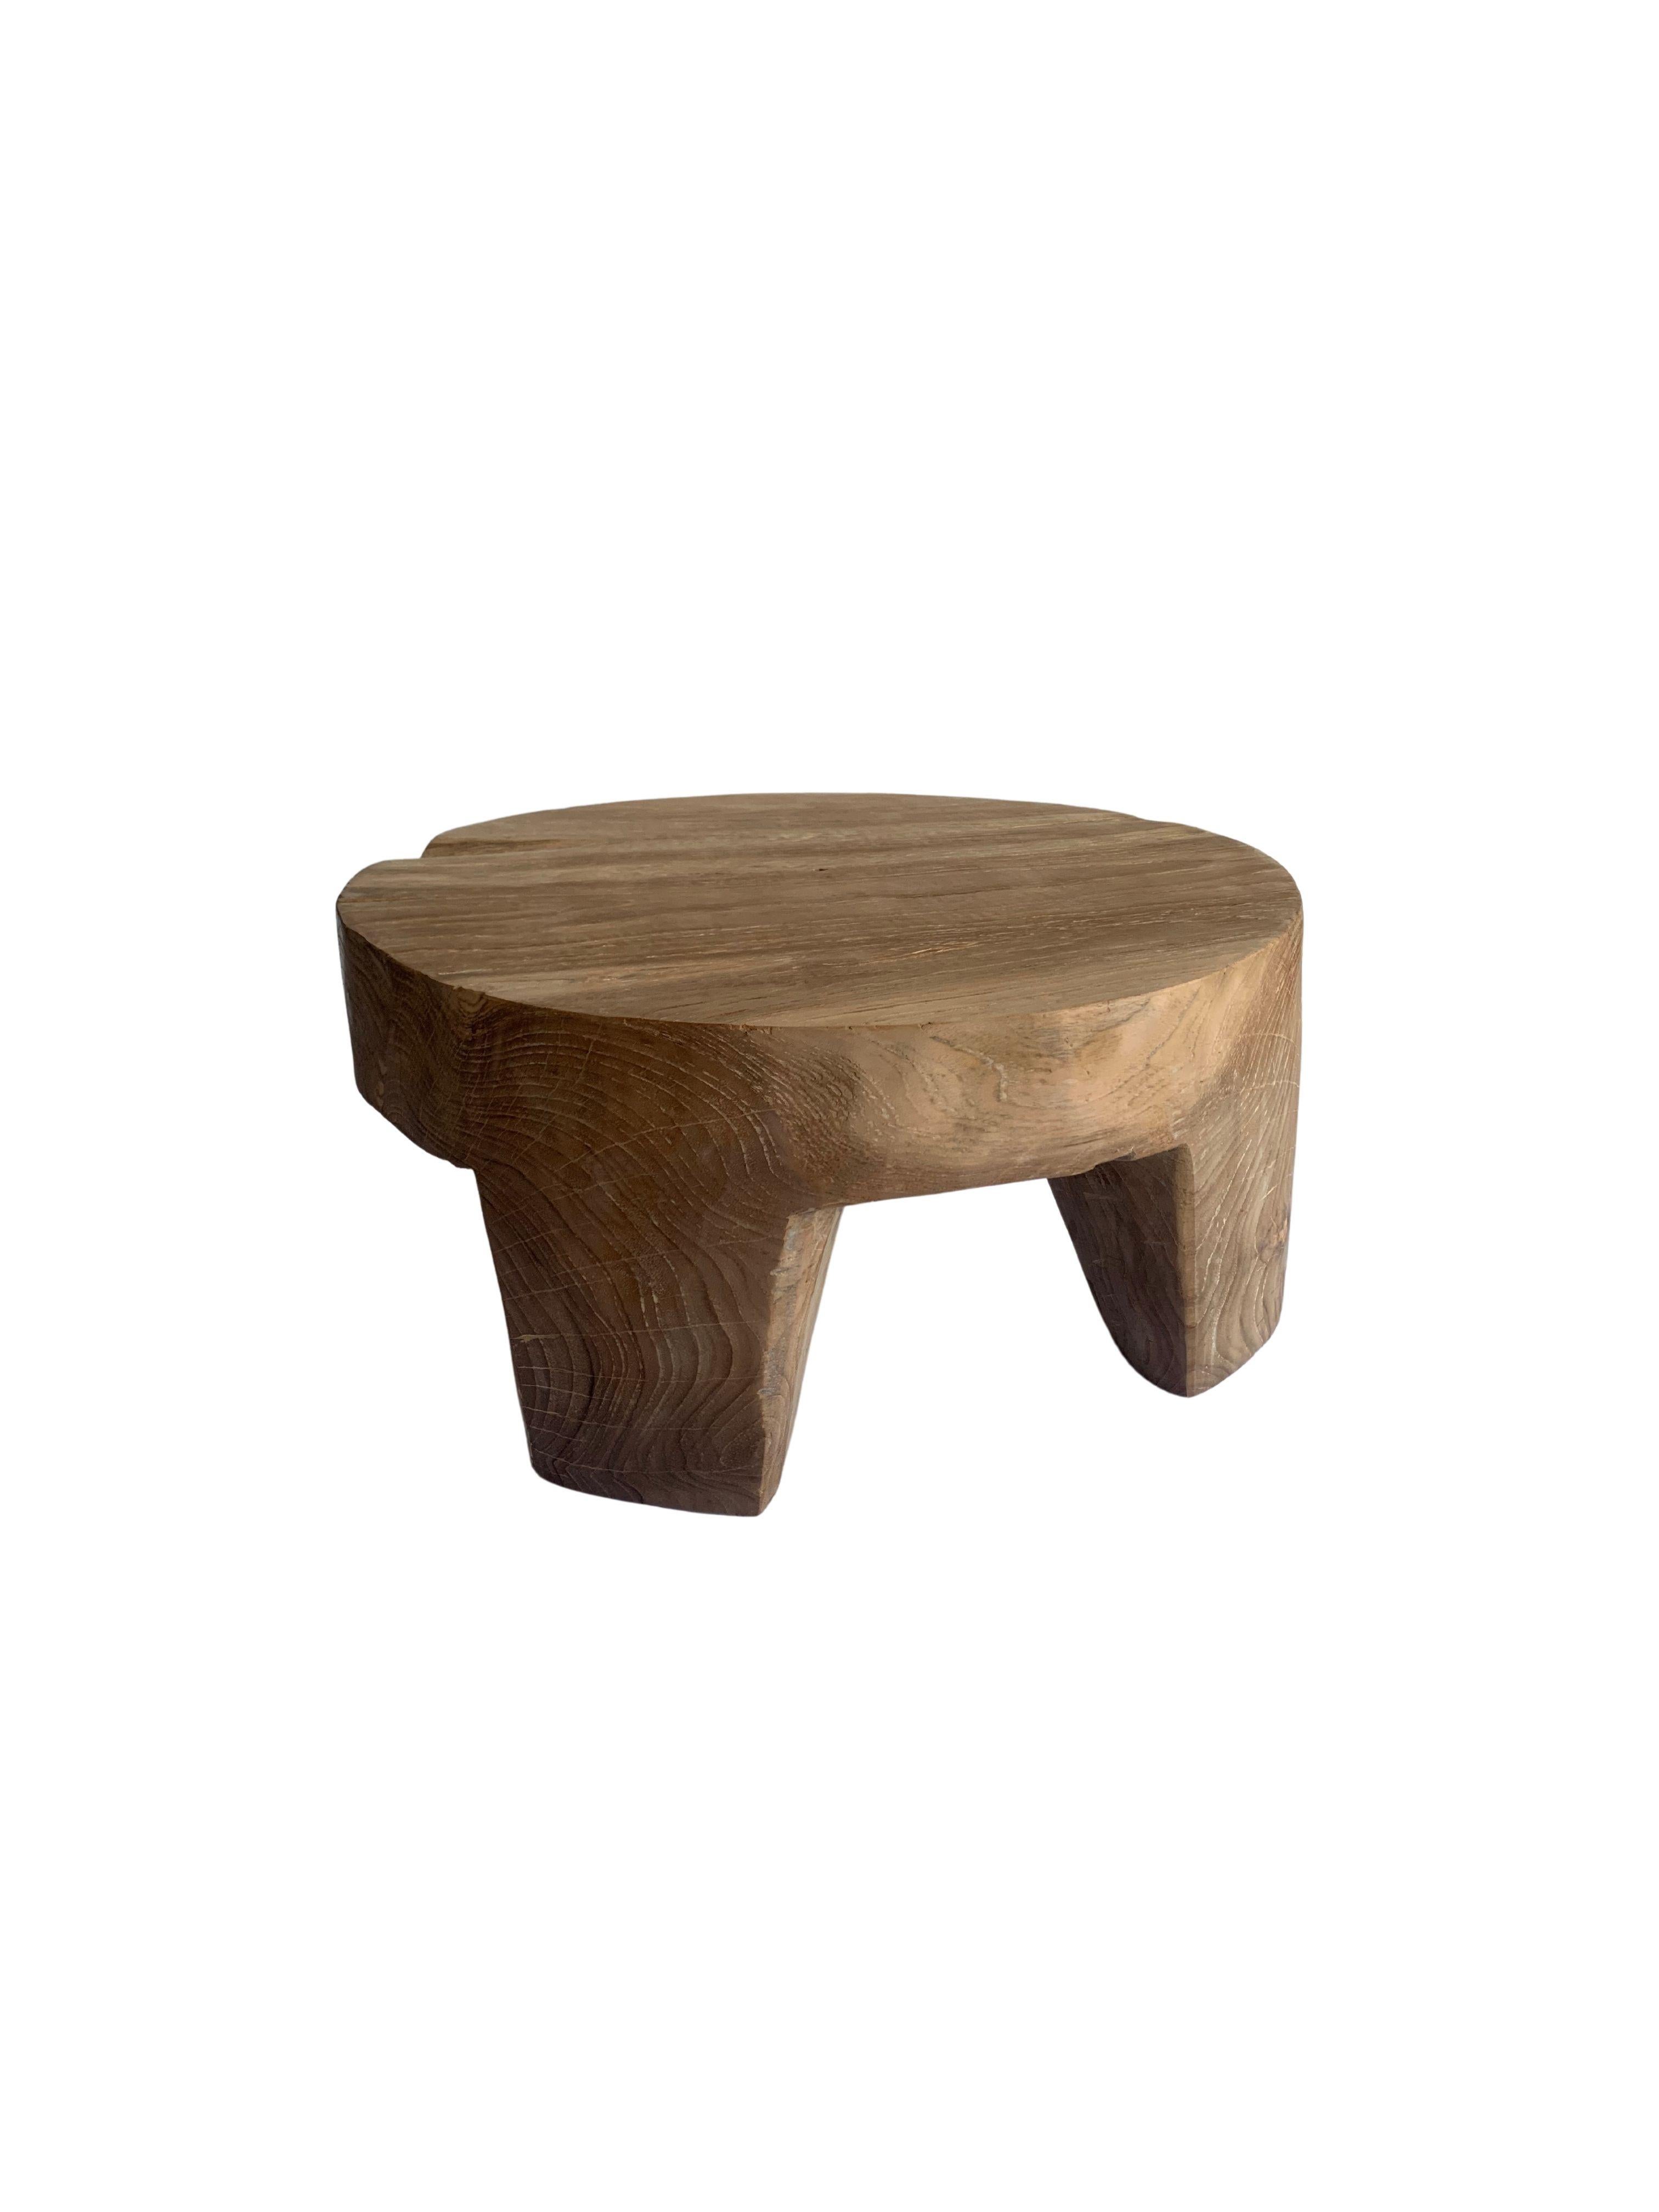 Hand-Crafted Sculptural Side Table Crafted from Solid Teak Wood  For Sale